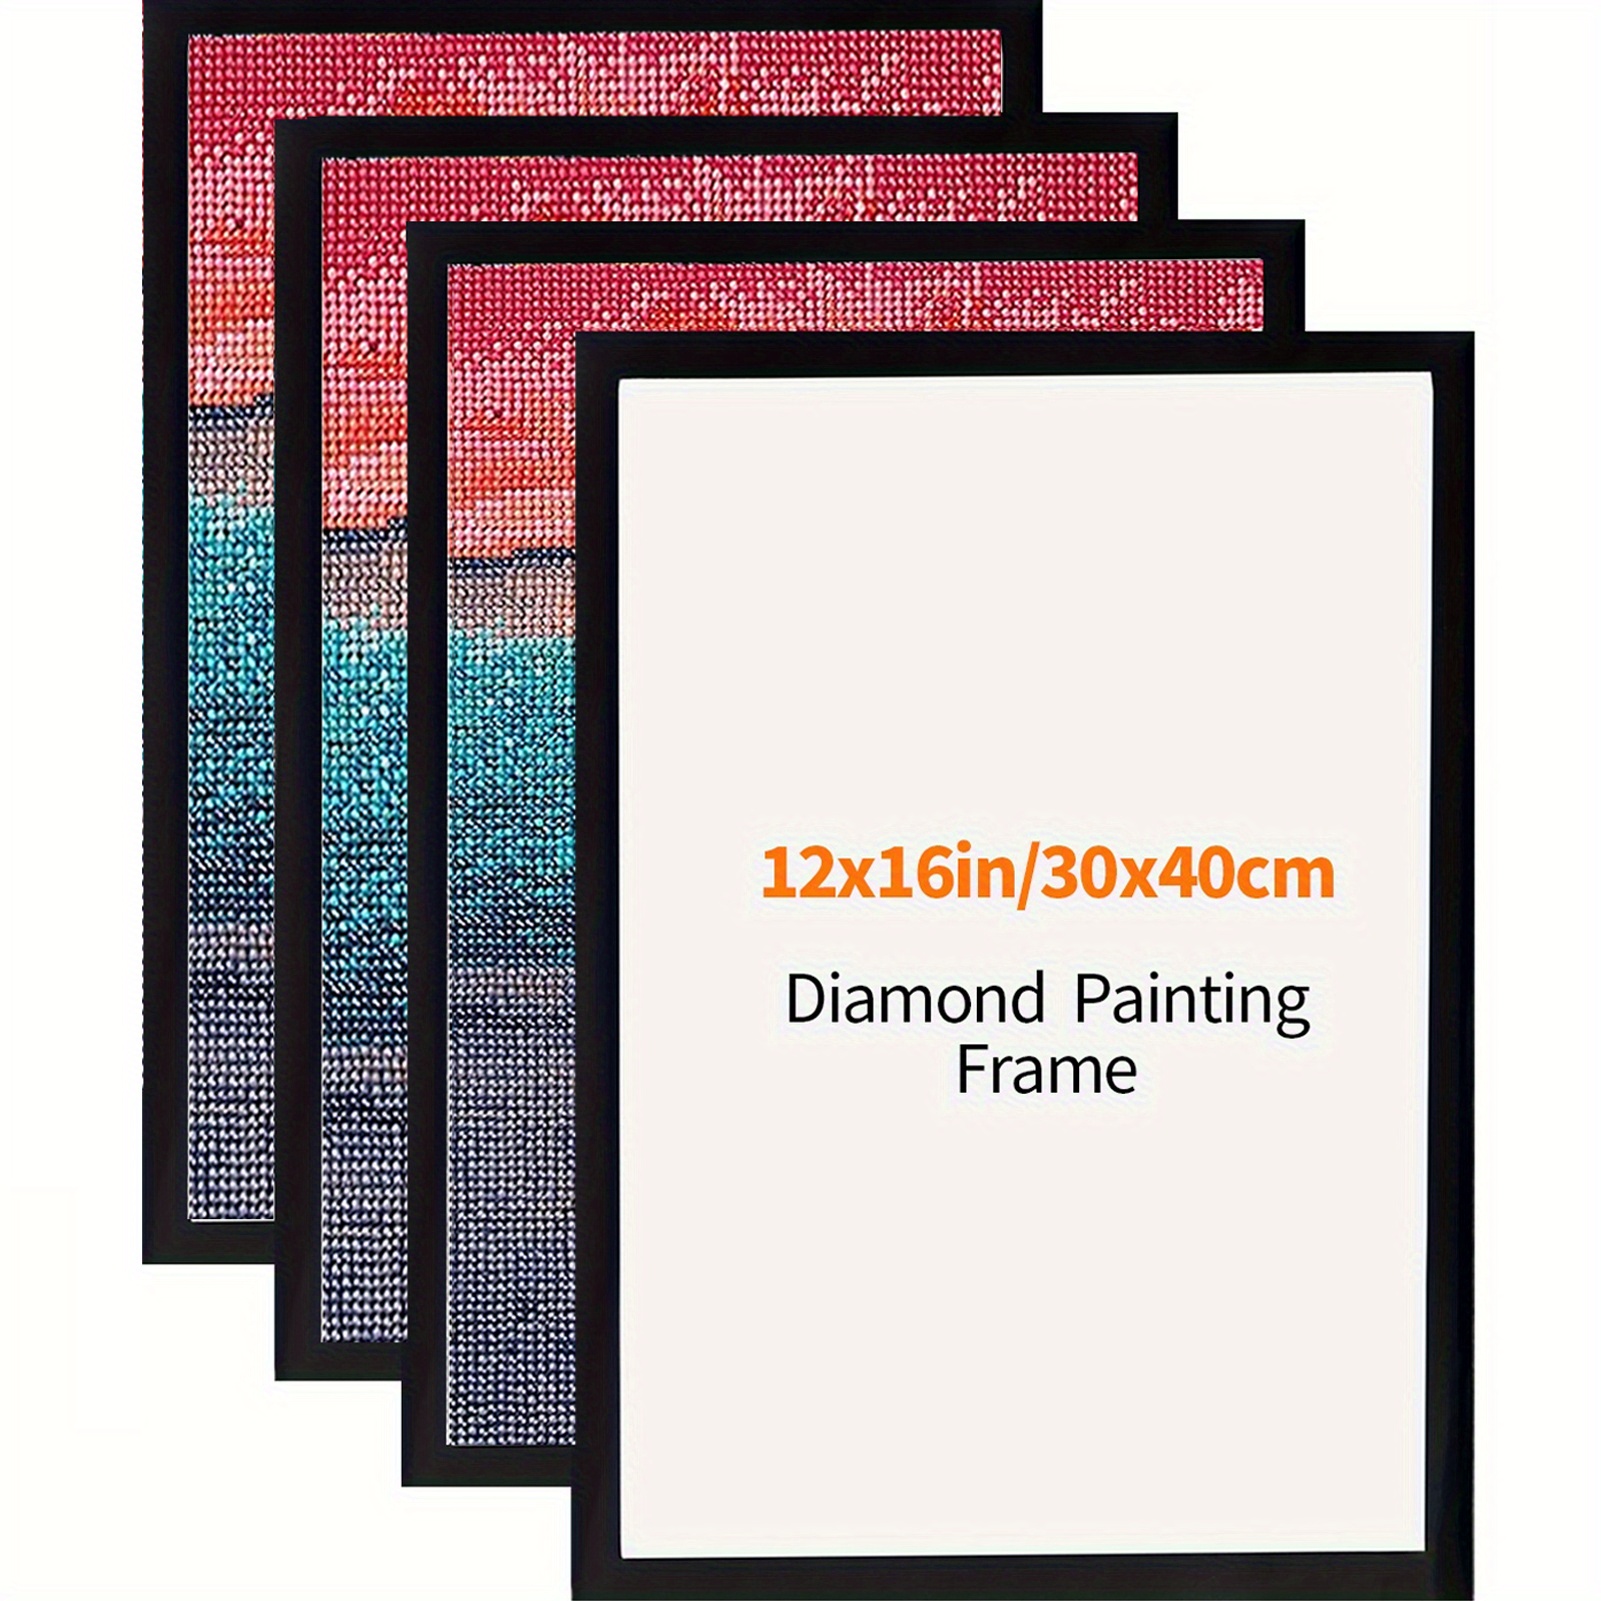 NAIMOER 2Pack Diamond Painting Frames, Frames for 12x16in/30x40cm Diamond Painting Canvas, Magnetic Diamond Art Frame Self-Adhesive, Diamond Painting